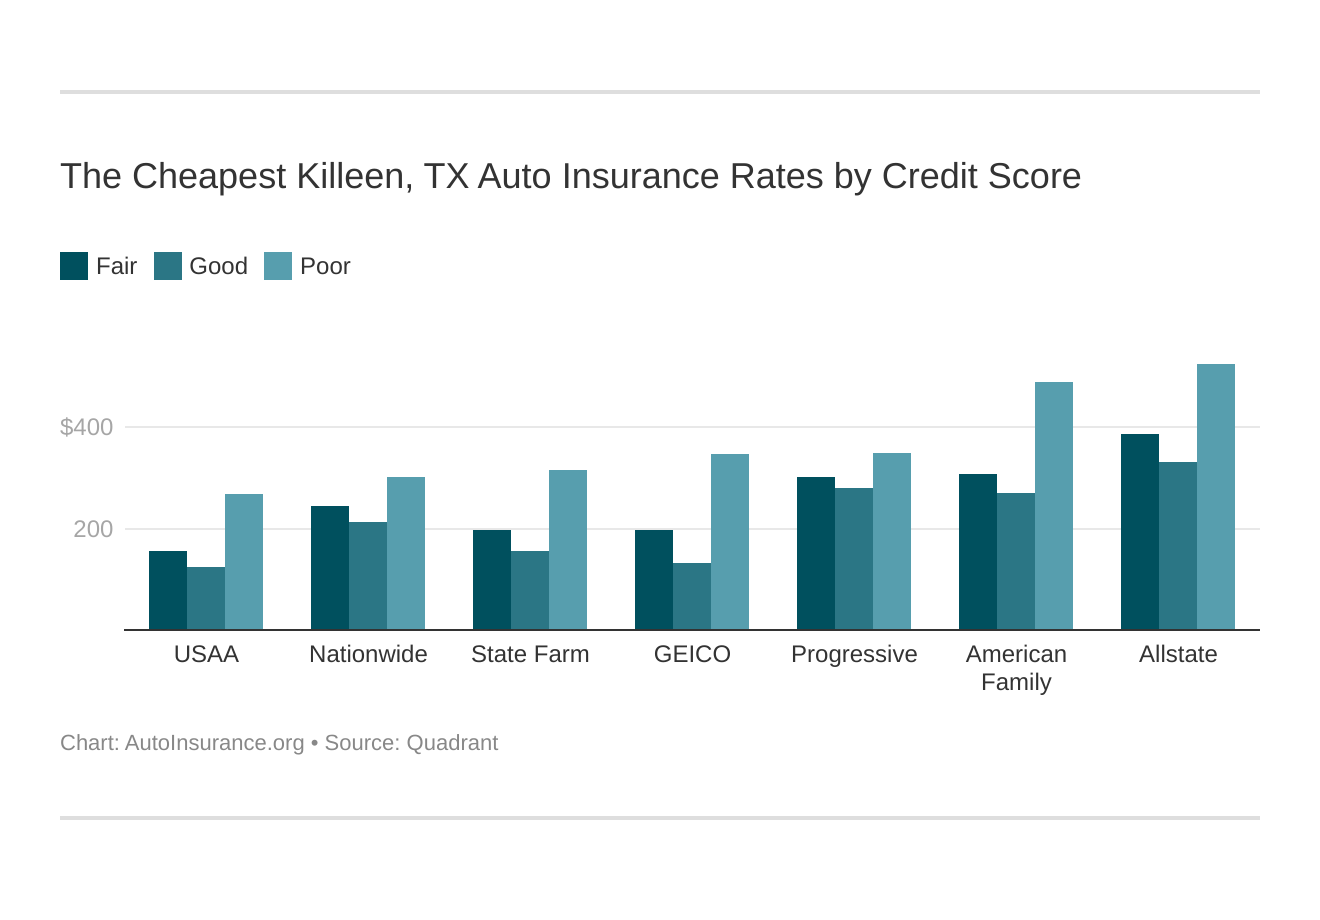 The Cheapest Killeen, TX Auto Insurance Rates by Credit Score